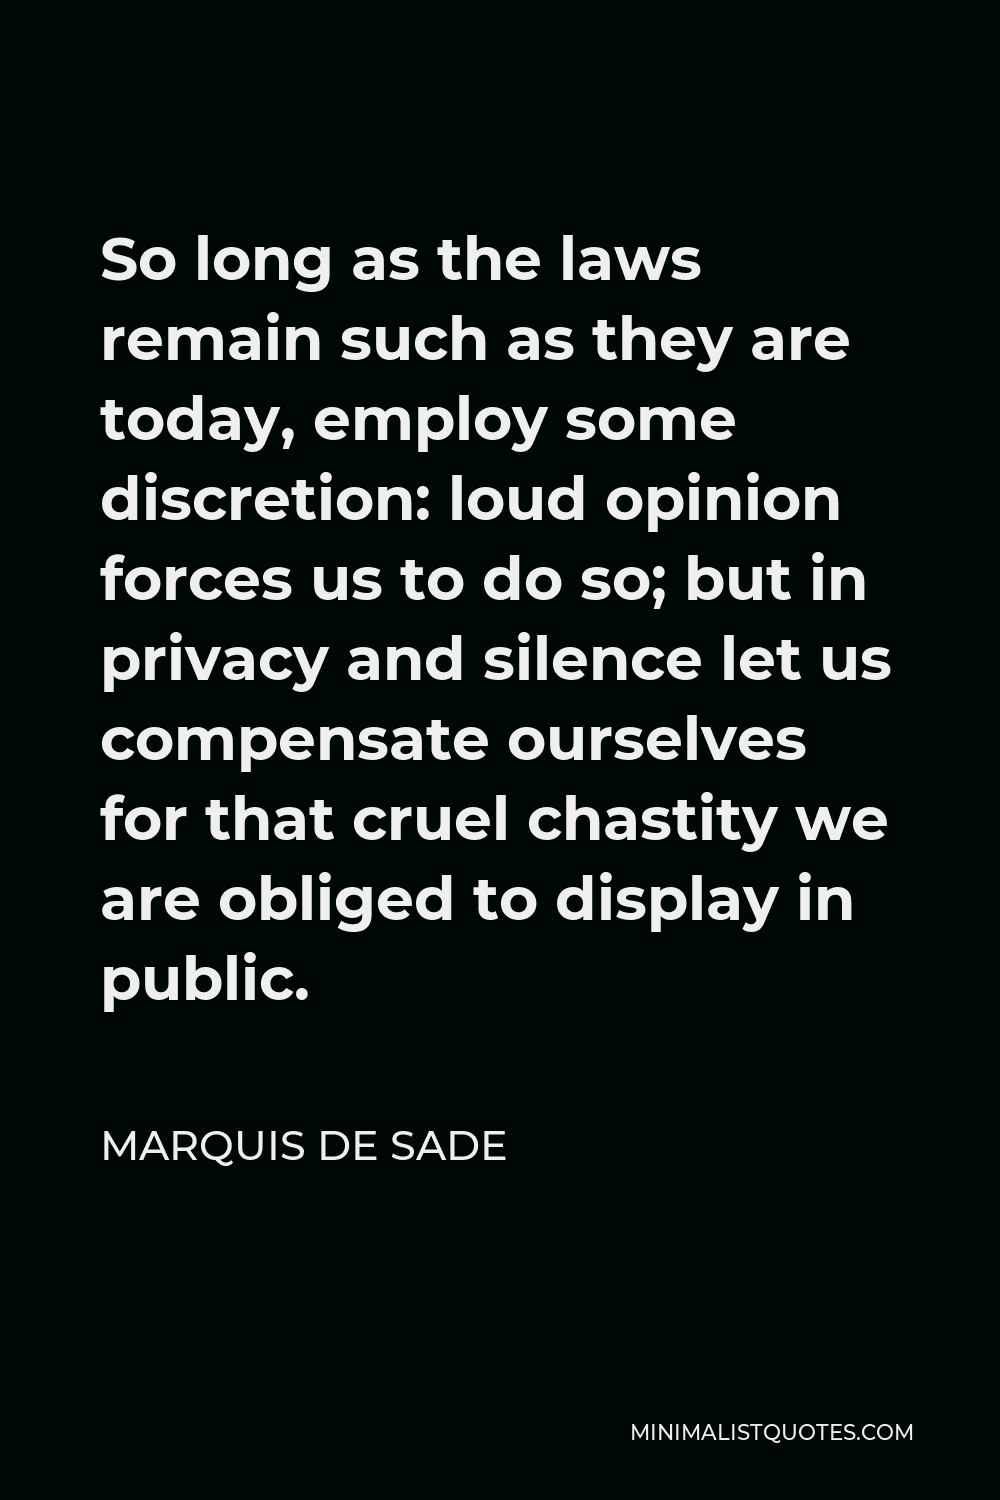 Marquis de Sade Quote - So long as the laws remain such as they are today, employ some discretion: loud opinion forces us to do so; but in privacy and silence let us compensate ourselves for that cruel chastity we are obliged to display in public.